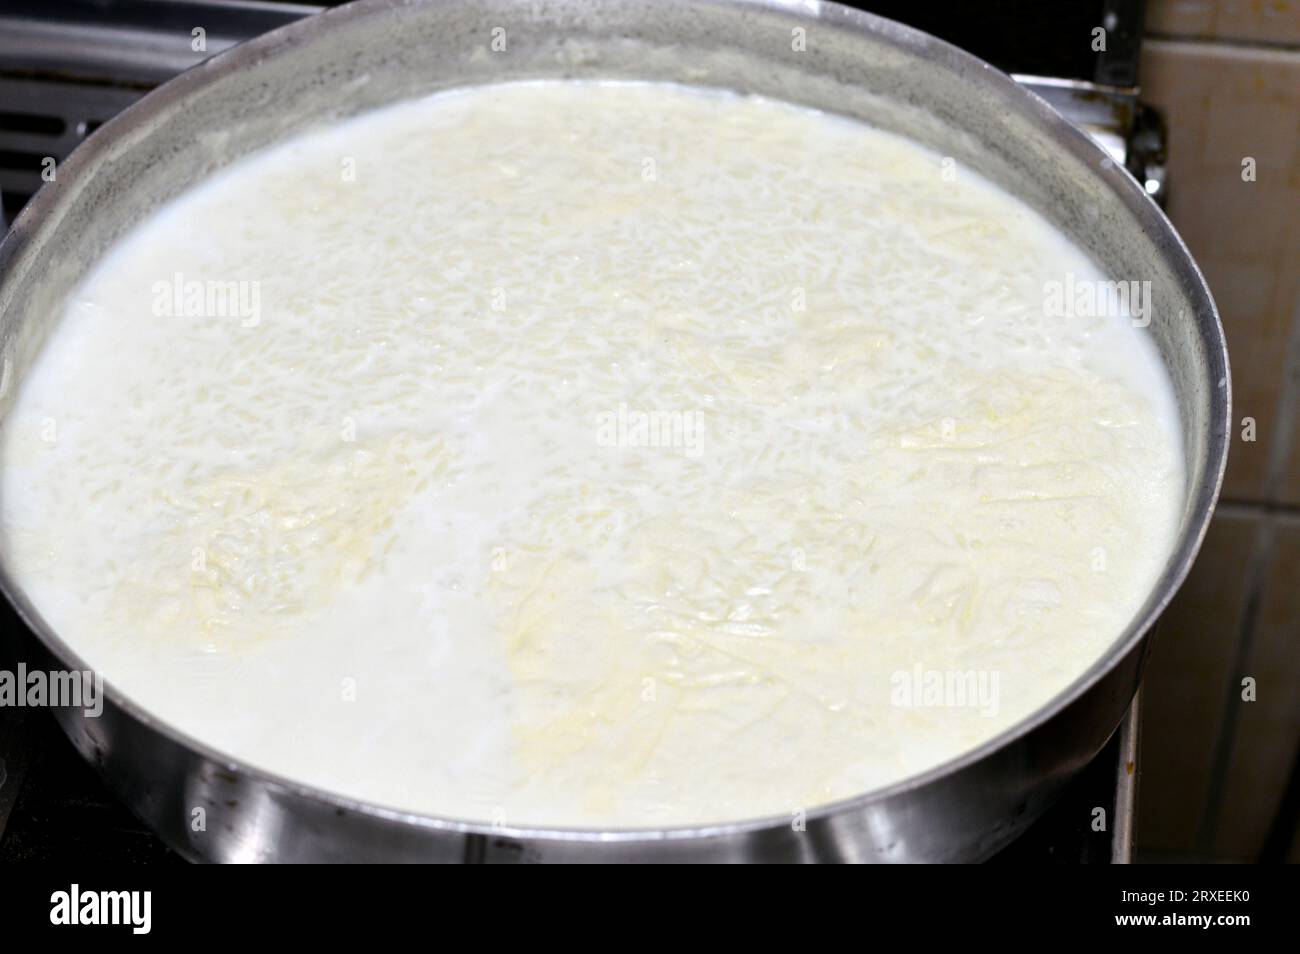 Egyptian baked rice or Roz muammar's combination of rice, fresh cream, milk, ghee or butter, a very popular Egyptian dish, a simple, sumptuous Egyptia Stock Photo